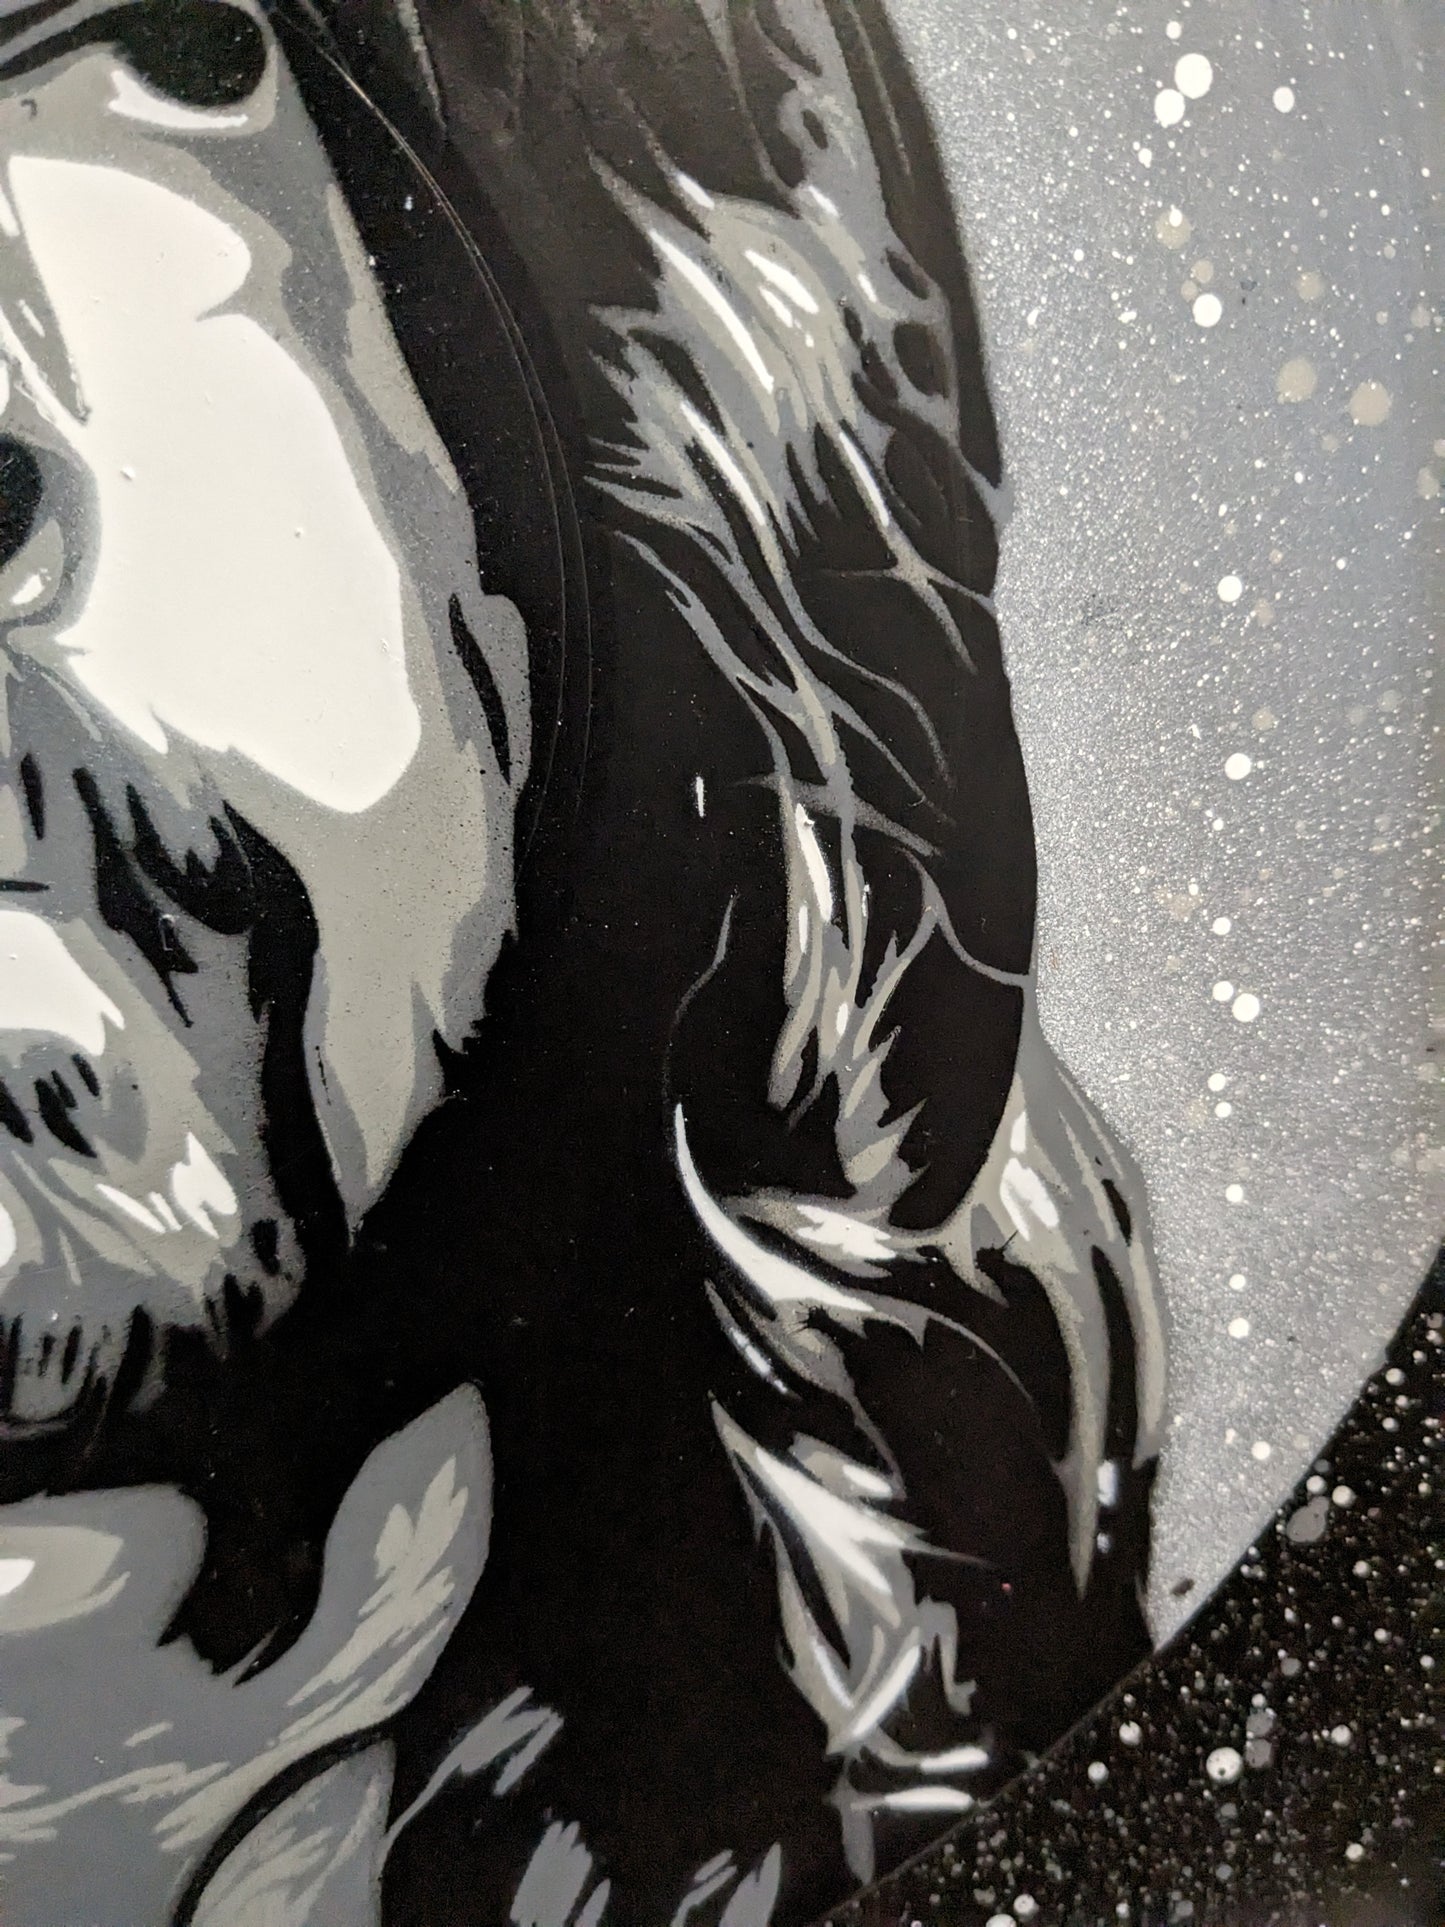 Dave Grohl 12" Spray Painted Vinyl